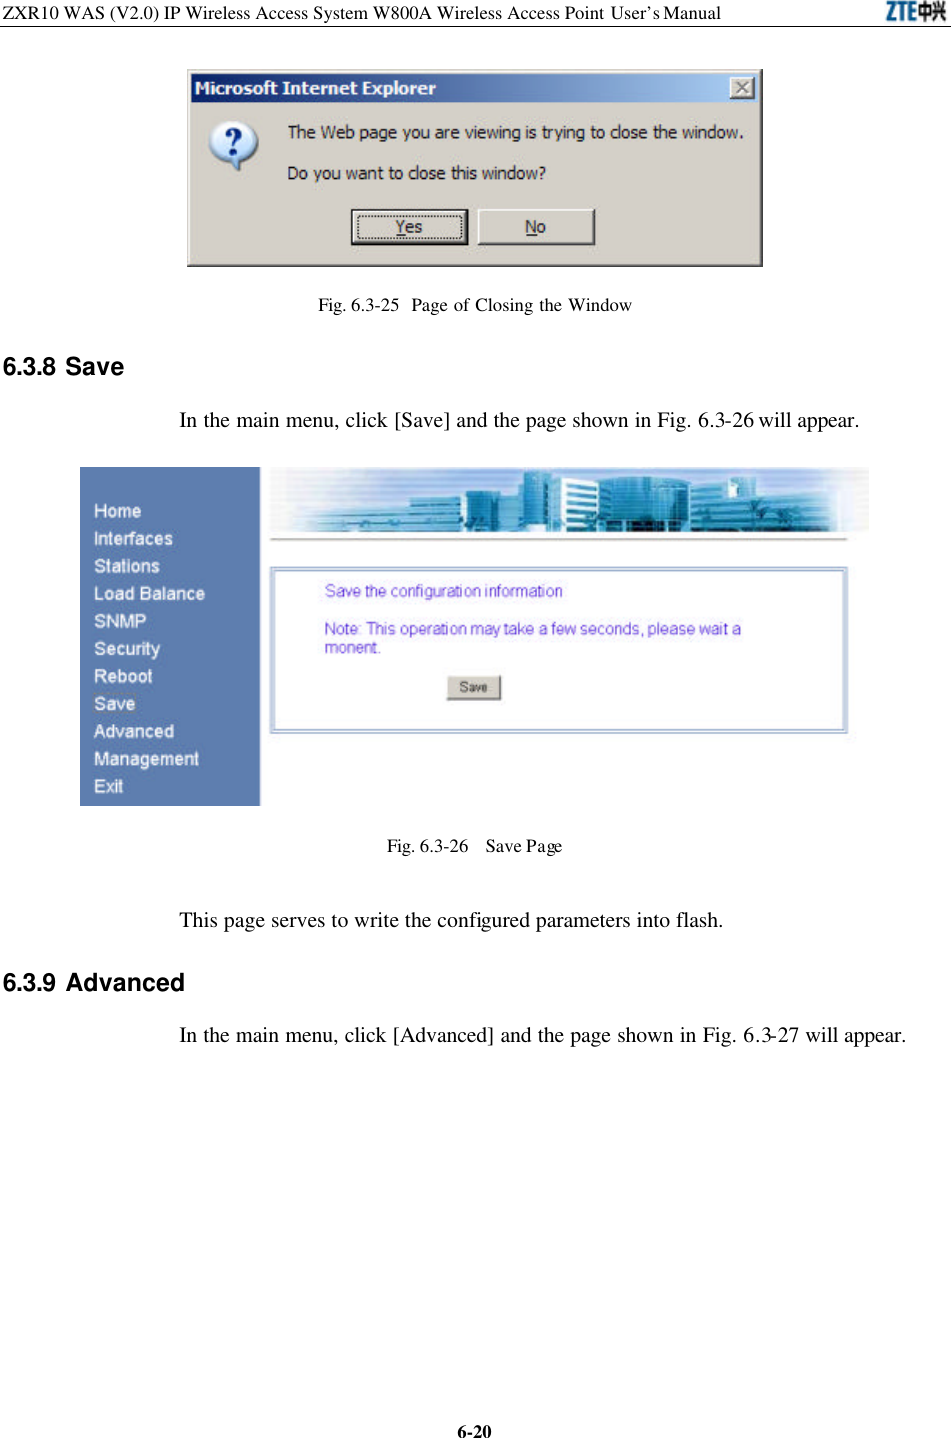 ZXR10 WAS (V2.0) IP Wireless Access System W800A Wireless Access Point User’s Manual  6-20 Fig. 6.3-25  Page of Closing the Window 6.3.8 Save In the main menu, click [Save] and the page shown in Fig. 6.3-26 will appear.    Fig. 6.3-26  Save Page This page serves to write the configured parameters into flash.   6.3.9 Advanced   In the main menu, click [Advanced] and the page shown in Fig. 6.3-27 will appear.   